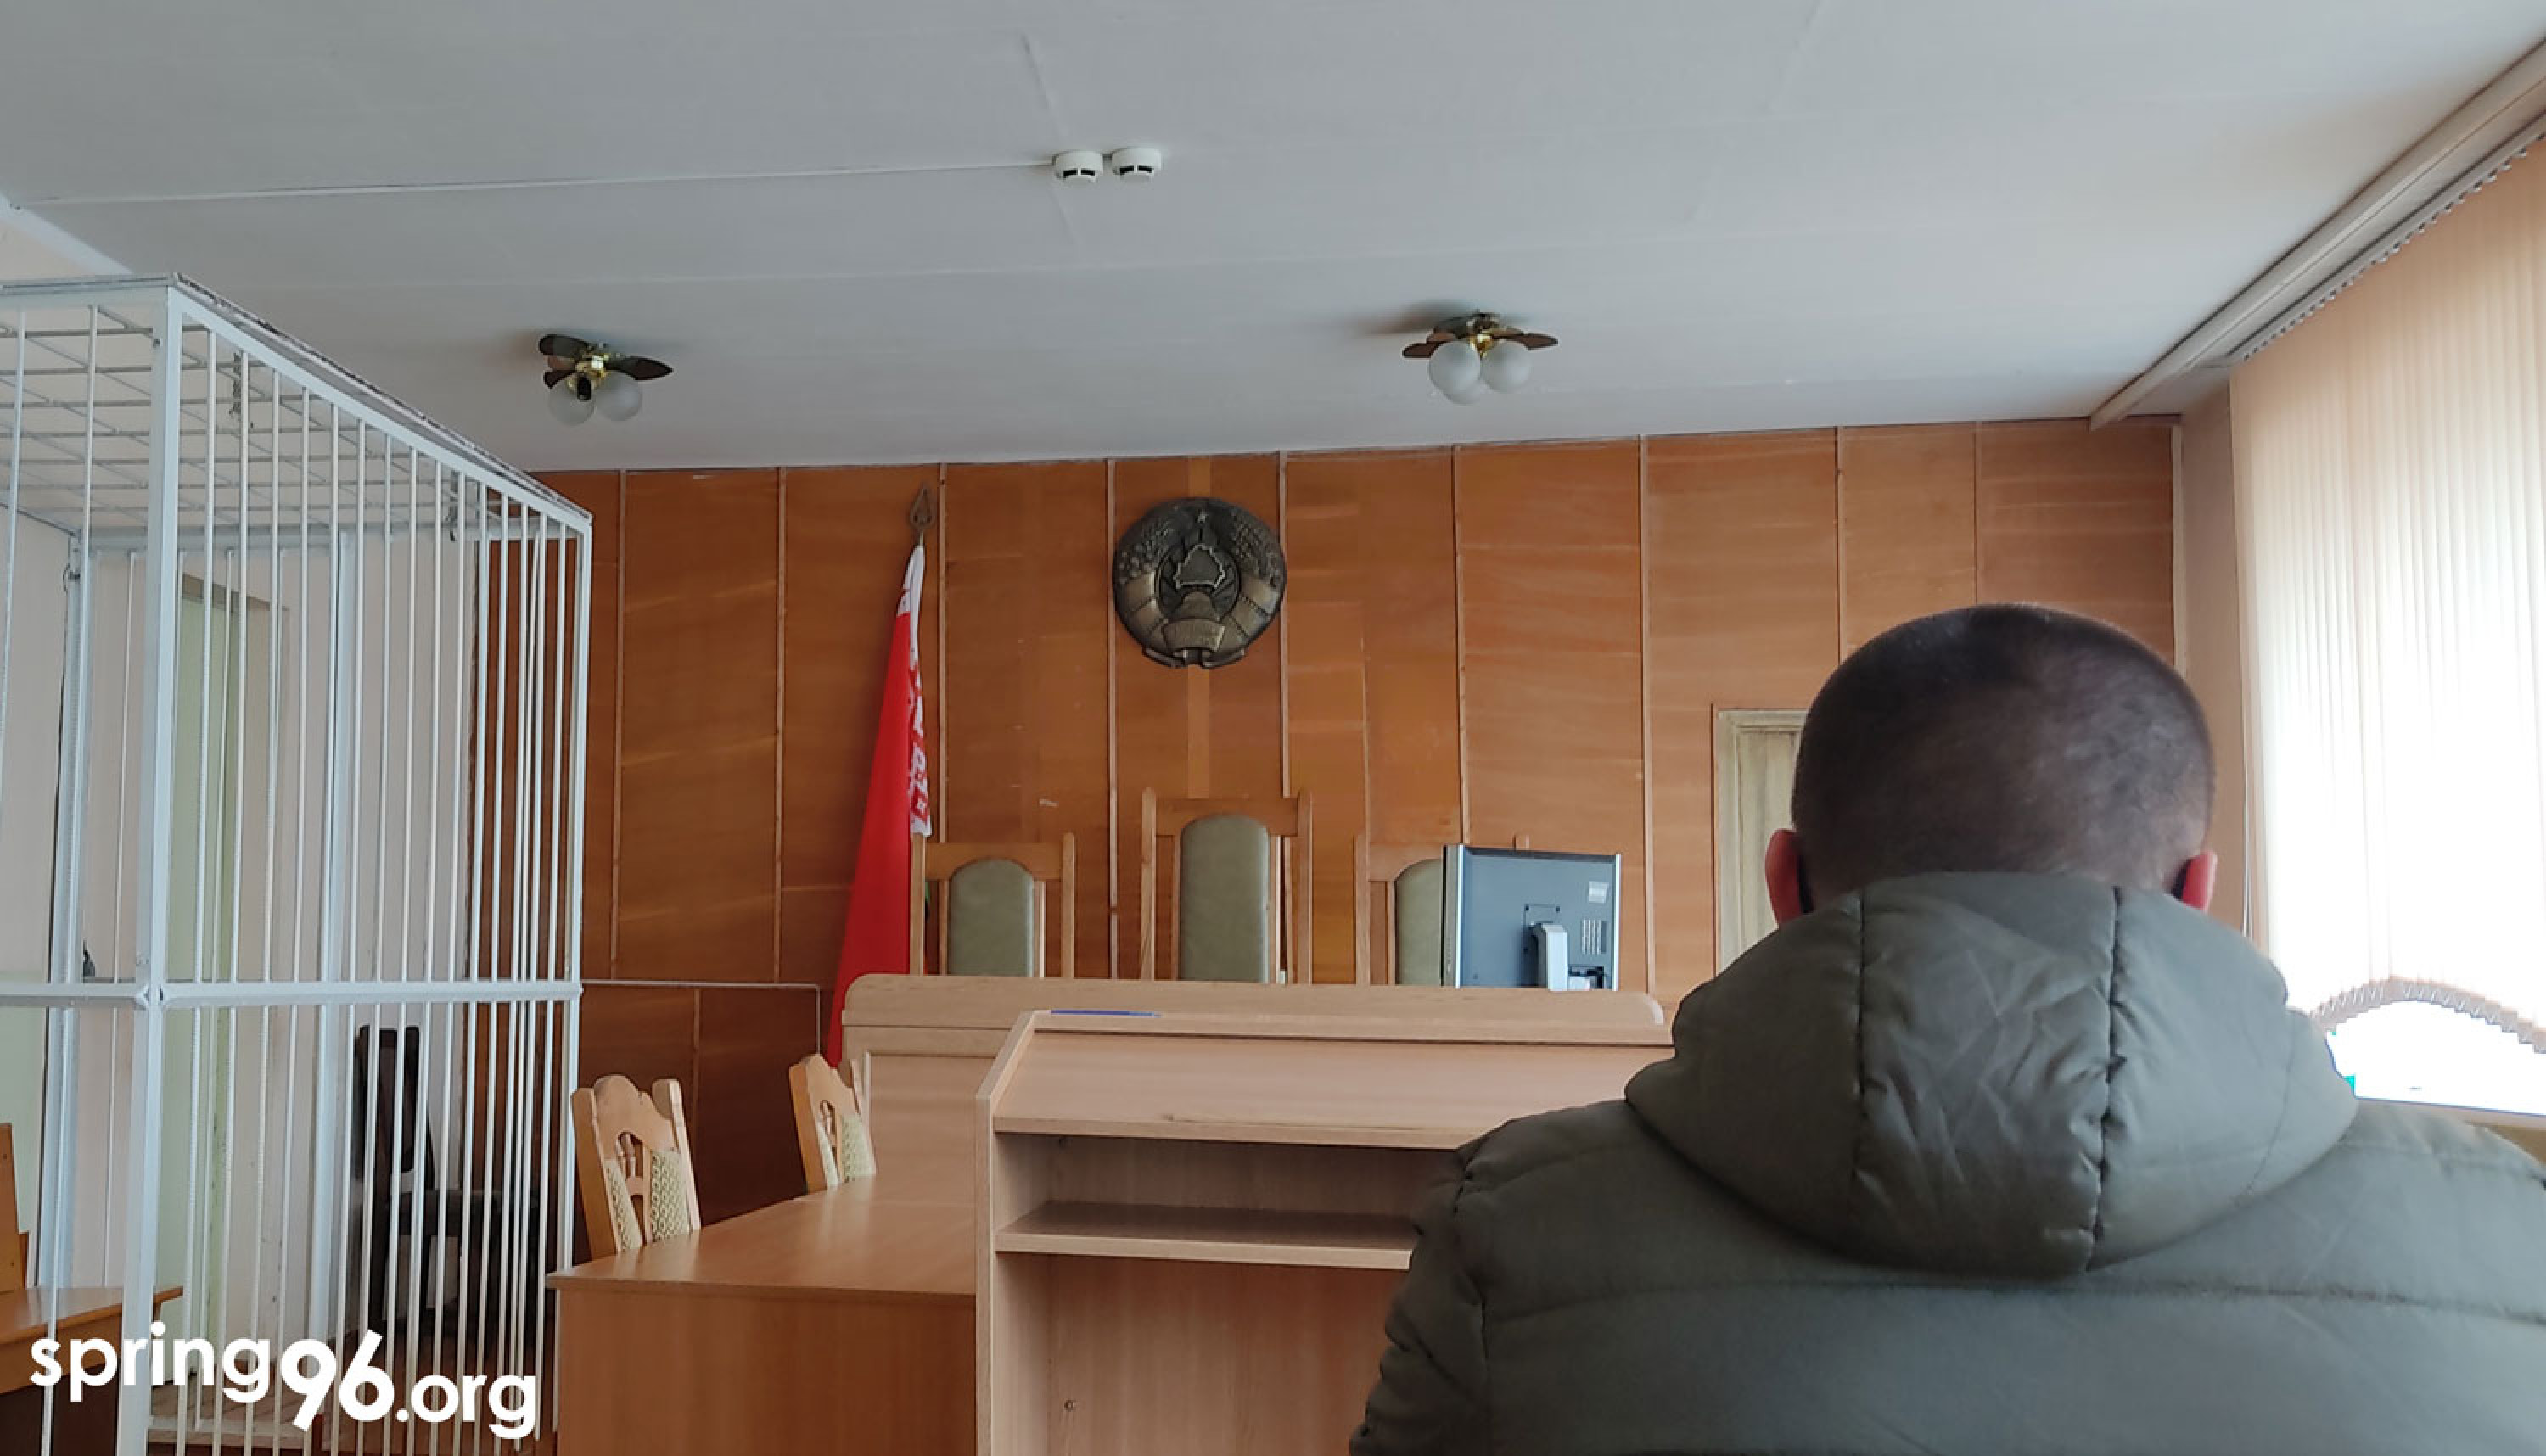 A courtroom at the Uzda District Court. Credit: spring96.org